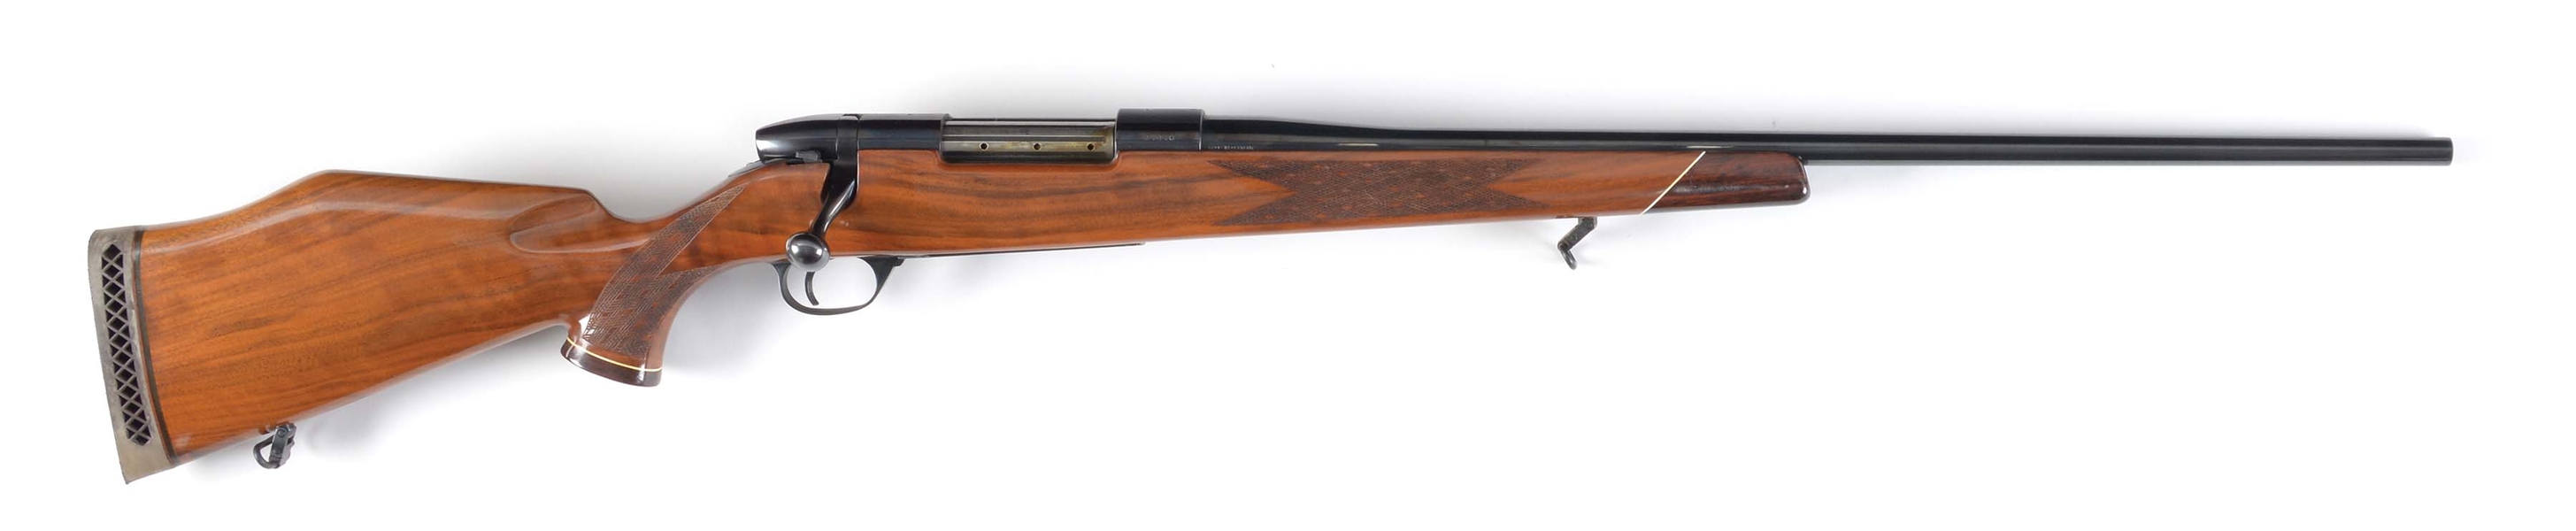 (C)GERMAN WEATHERBY MK V BOLT ACTION RIFLE 1961 WITH BOX AND TEST TARGET.